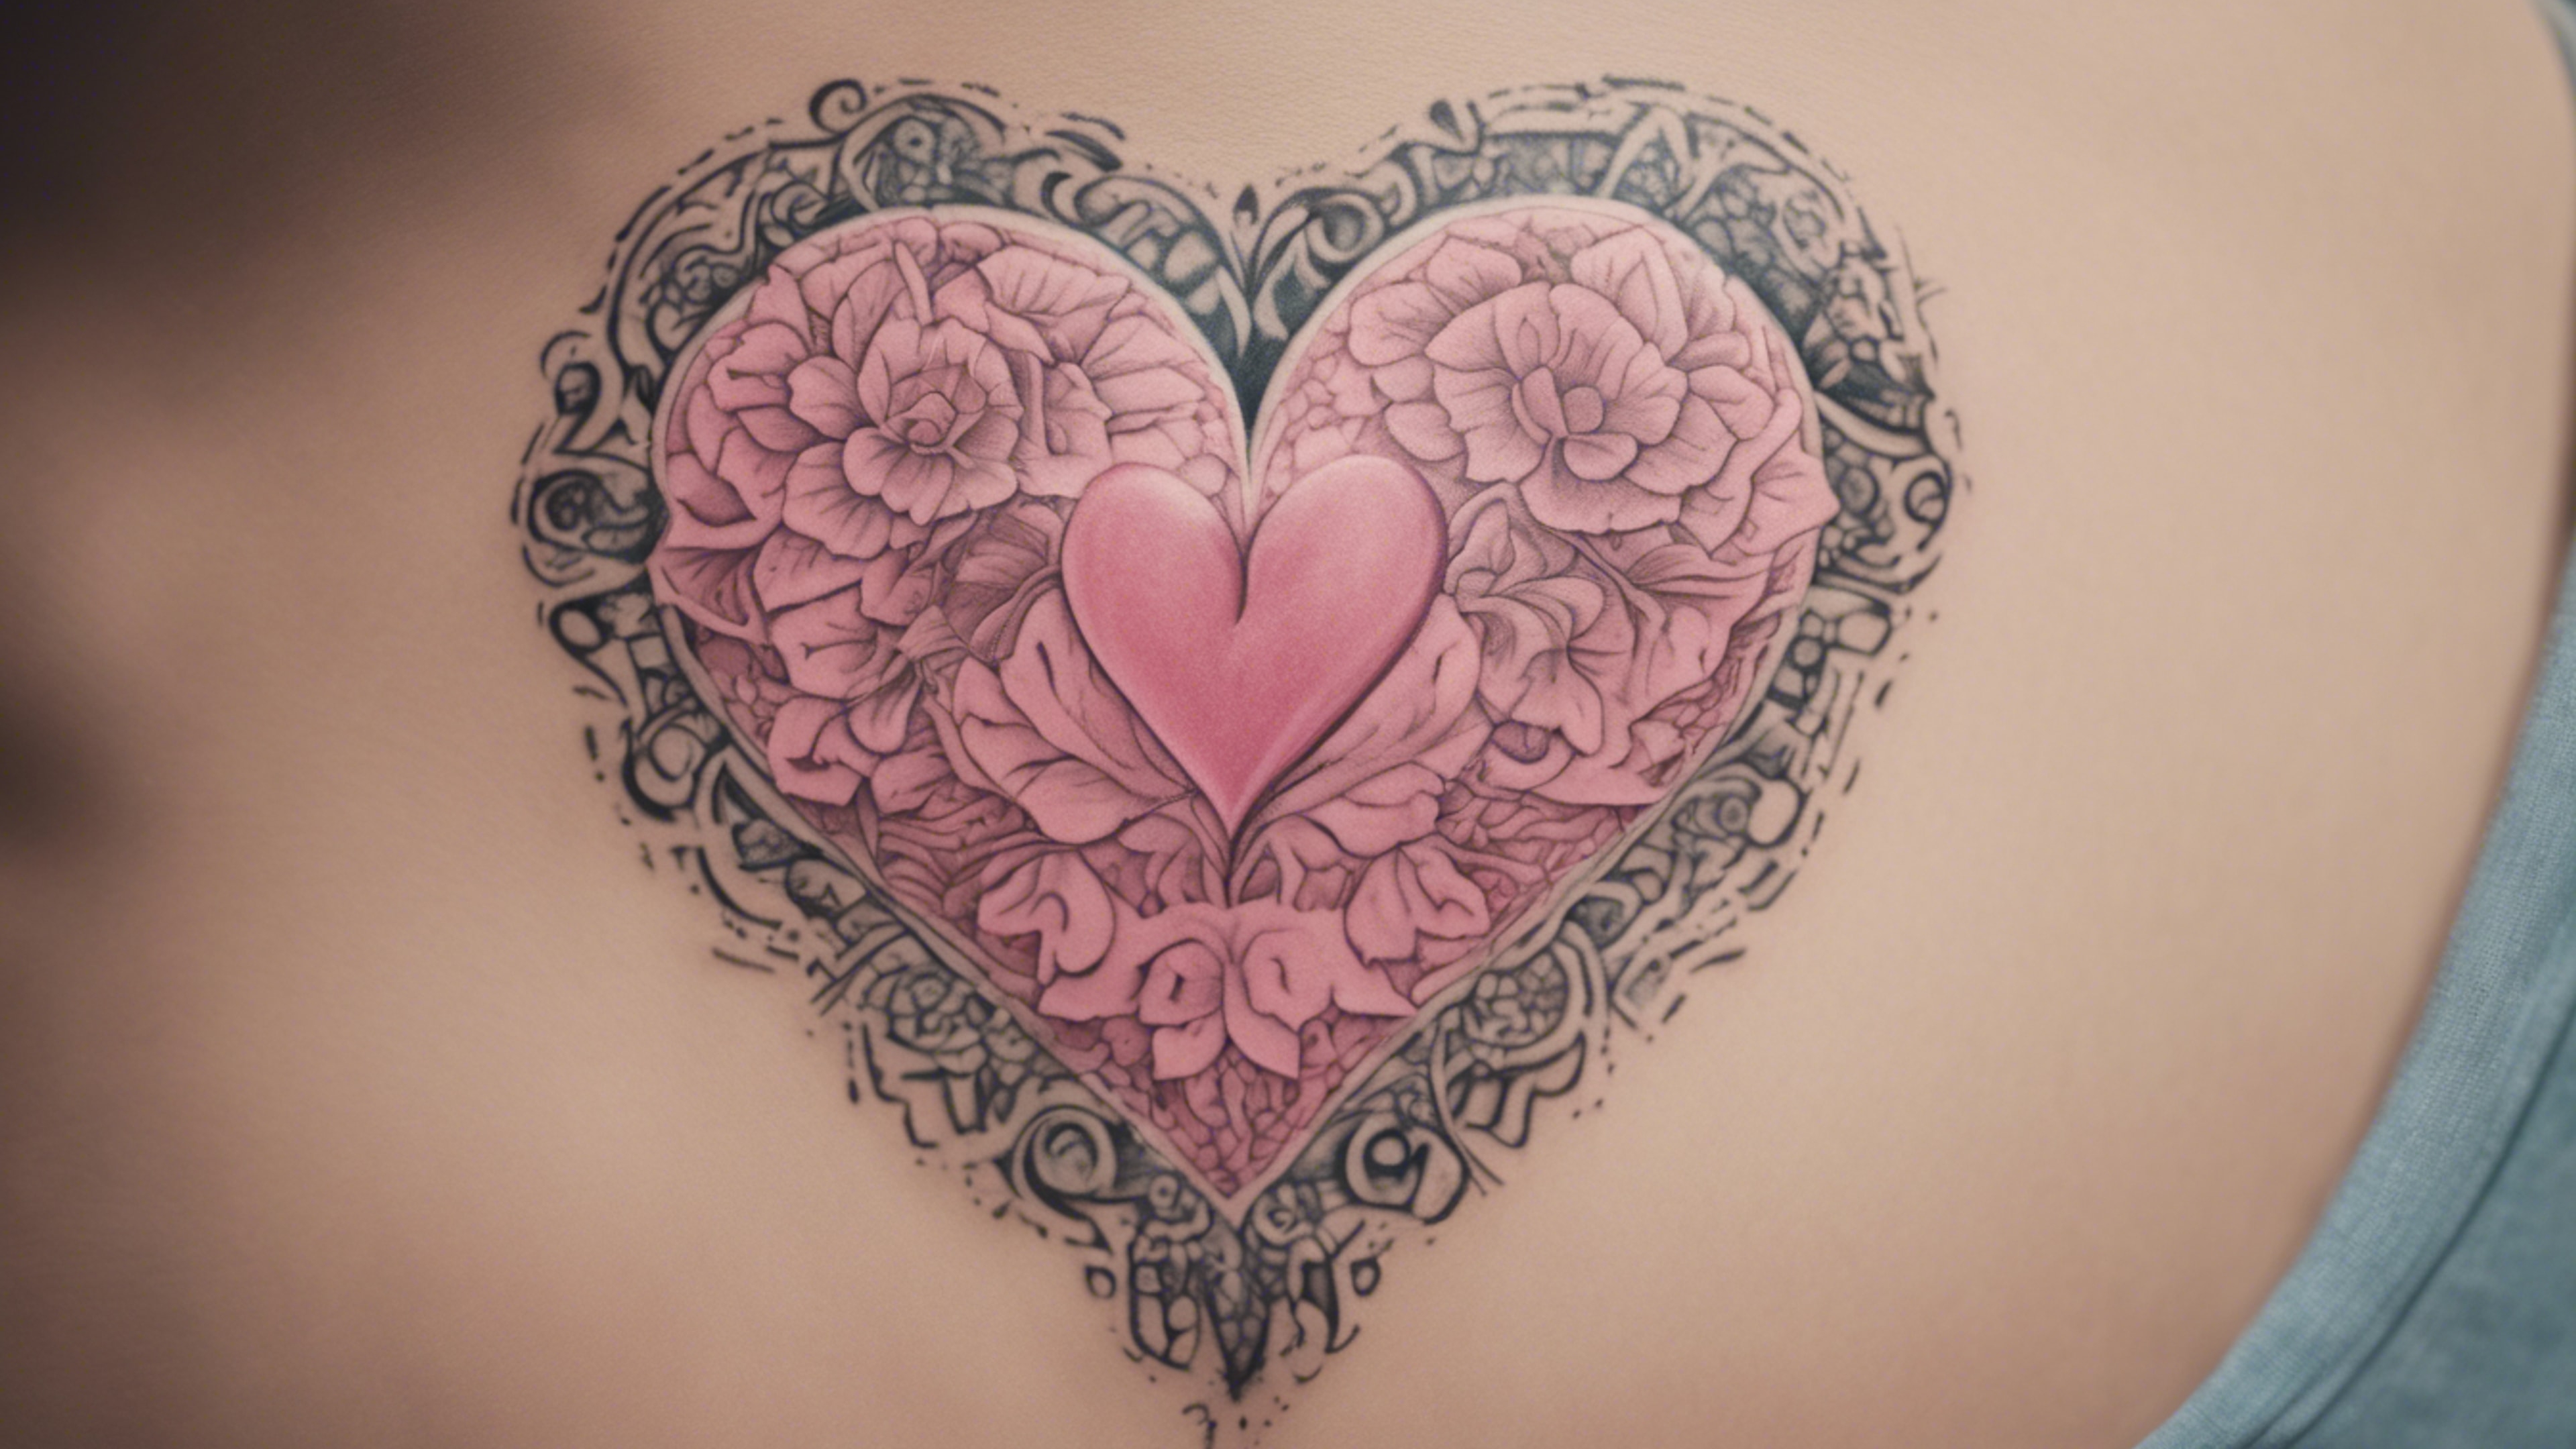 A small pink heart shaped tattoo embellished with intricate floral patterns.壁紙[dd23c5855ab44f40b2fe]